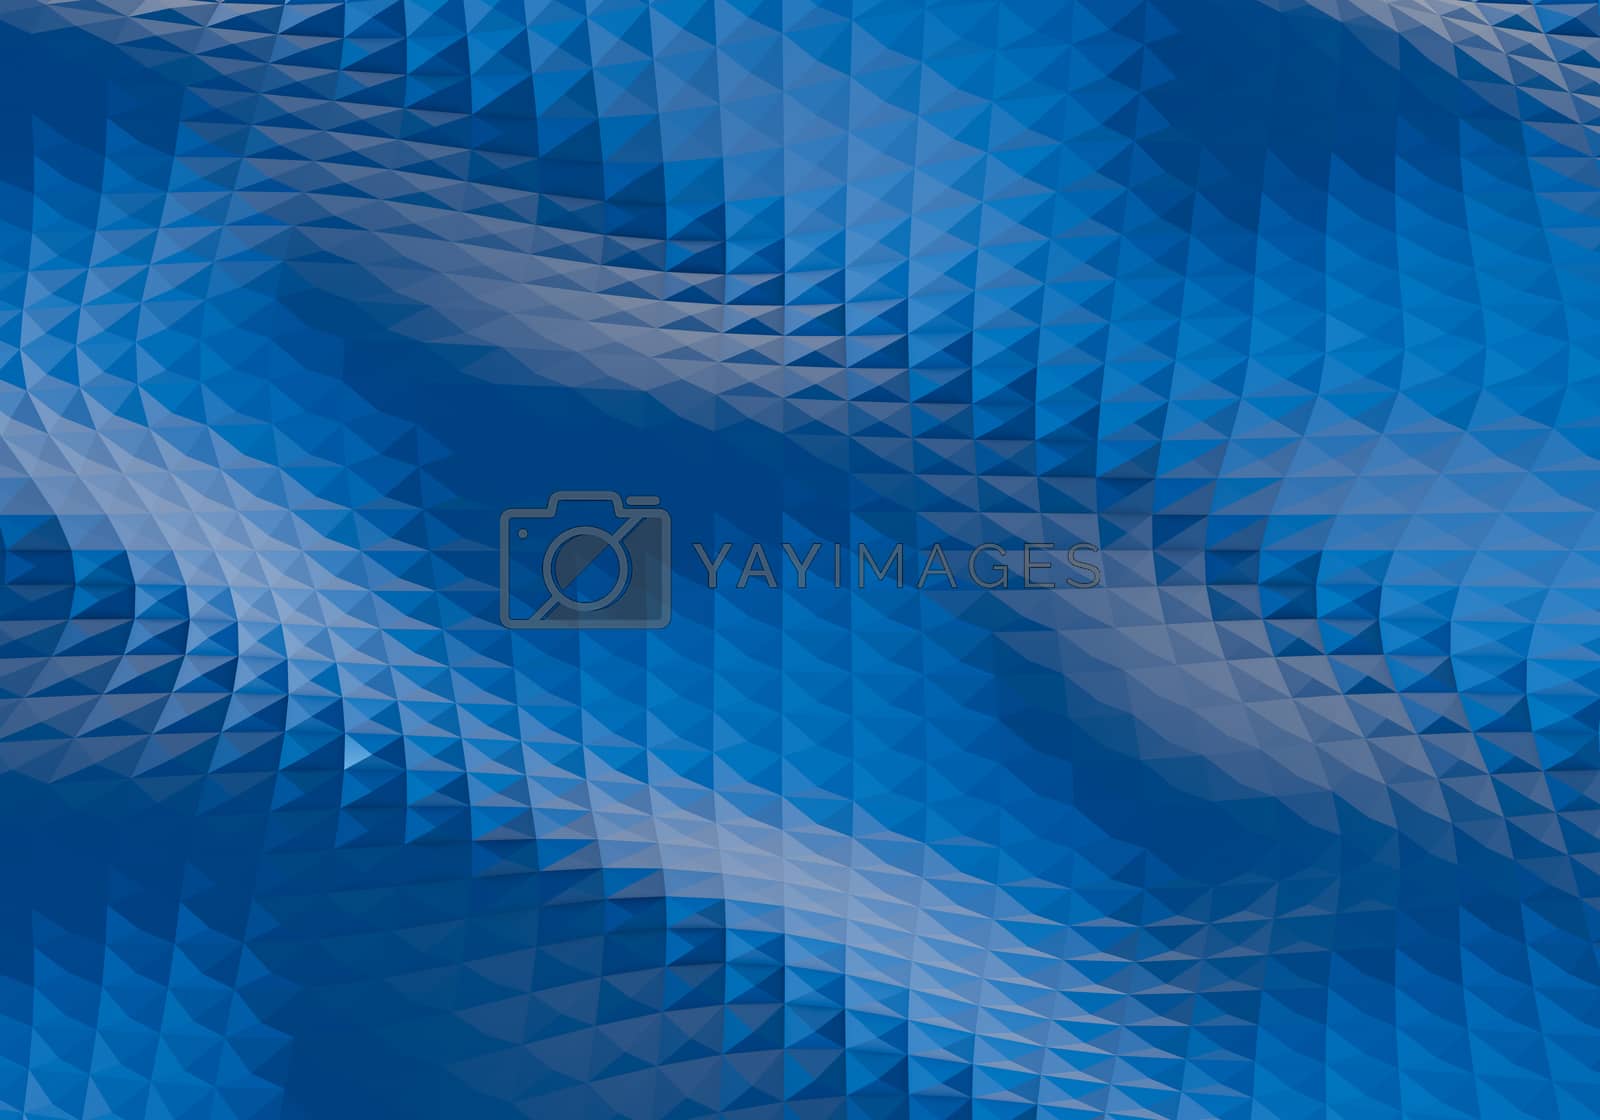 Royalty free image of Abstract blue background. 3D low poly style. illustration of 3D  by SaitanSainam